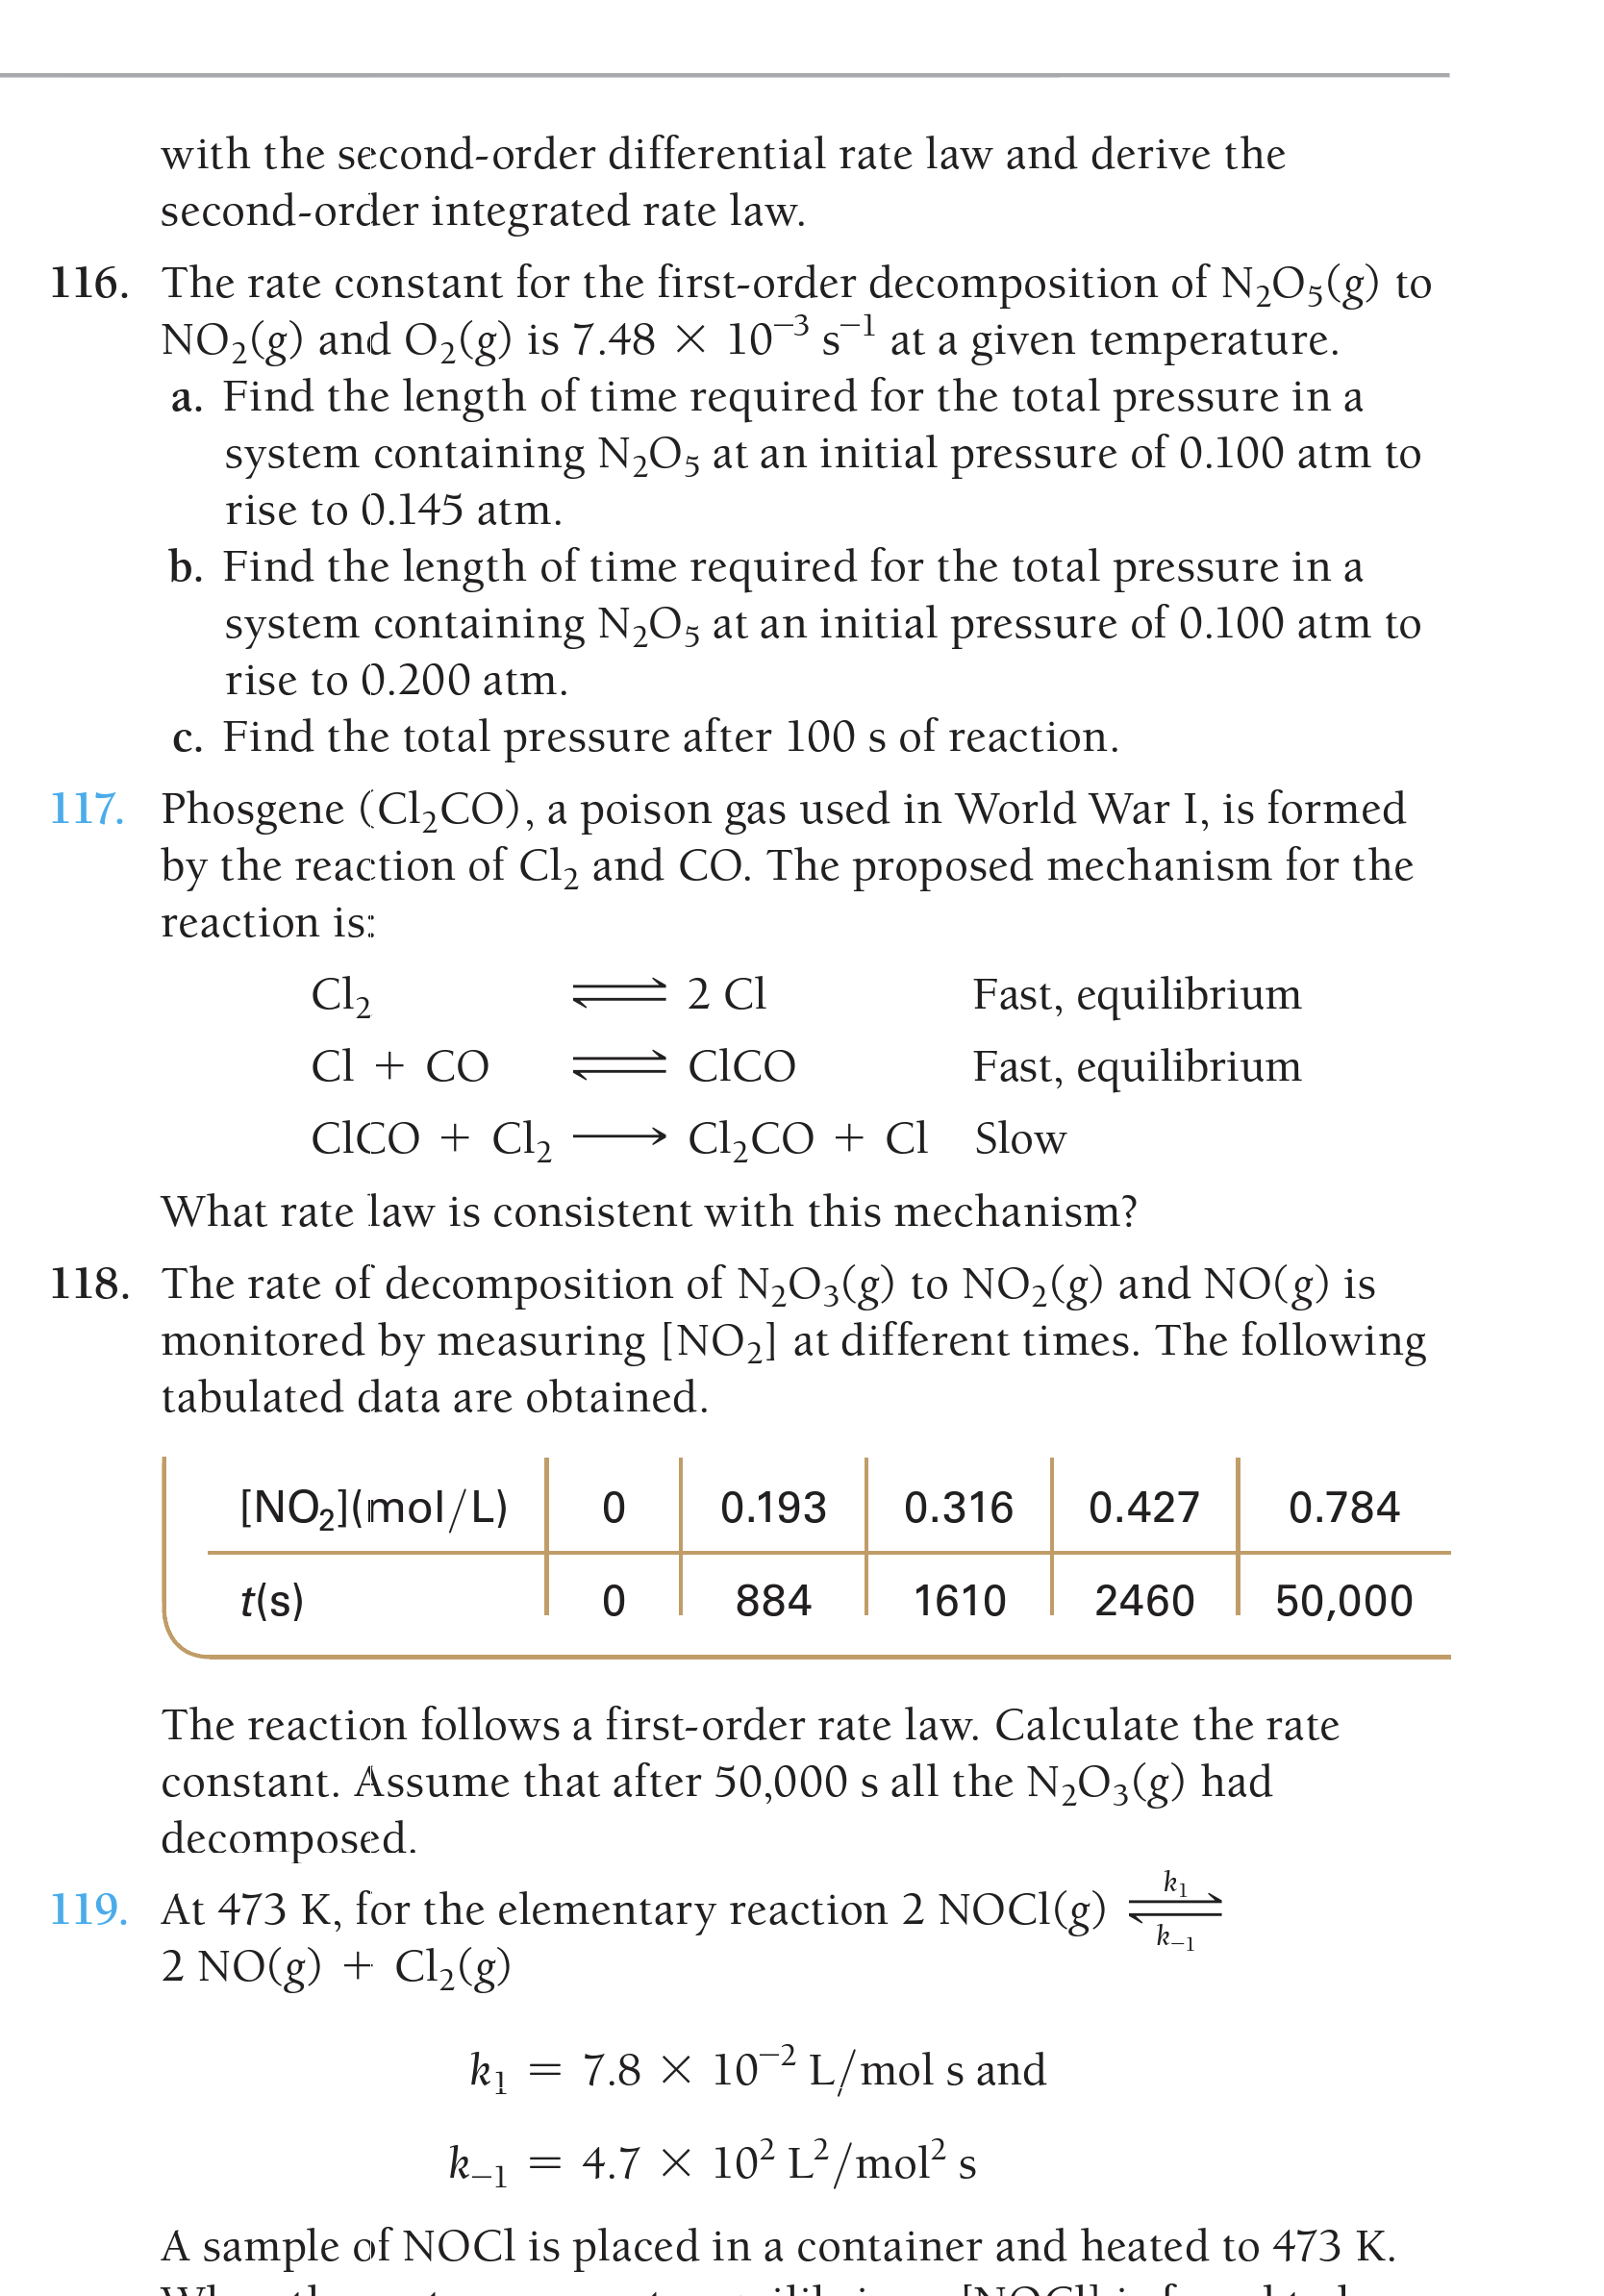 with the second-order differential rate law and derive the
second-order integrated rate law.
116. The rate constant for the first-order decomposition of N2O;(g) to
at a given temperature.
NO2(g) and O2(g) is 7.48 × 10-3 s-1
a. Find the length of time required for the total pressure in a
system containing N,O5 at an initial pressure of 0.100 atm to
rise to 0.145 atm.
b. Find the length of time required for the total pressure in a
system containing N,O5 at an initial pressure of 0.100 atm to
rise to 0.200 atm.
c. Find the total pressure after 100 s of reaction.
117. Phosgene (Cl,CO), a poison gas used in World War I, is formed
by the reaction of Cl2 and CO. The proposed mechanism for the
reaction is:
Cl2
2 Cl
Fast, equilibrium
Cl + CO
CICO
Fast, equilibrium
CICO + Cl2
C12CO + Cl Slow
What rate law is consistent with this mechanism?
118. The rate of decomposition of N,O3(g) to NO2(g) and NO(g) is
monitored by measuring [NO2] at different times. The following
tabulated data are obtained.
[NO2](mol/L)
0.193
0.316
0.427
0.784
t(s)
884
1610
2460
50,000
The reaction follows a first-order rate law. Calculate the rate
constant. Assume that after 50,000 s all the N,O3(g) had
decomposed.
k1
119. At 473 K, for the elementary reaction 2 NOCI(g)
2 NO(g) + Cl,(g)
k-1
k1 :
= 7.8 × 10-2 L/mol s and
k-1
= 4.7 × 10² L²/mol? s
A sample of NOCI is placed in a container and heated to 473 K.
•1:1
